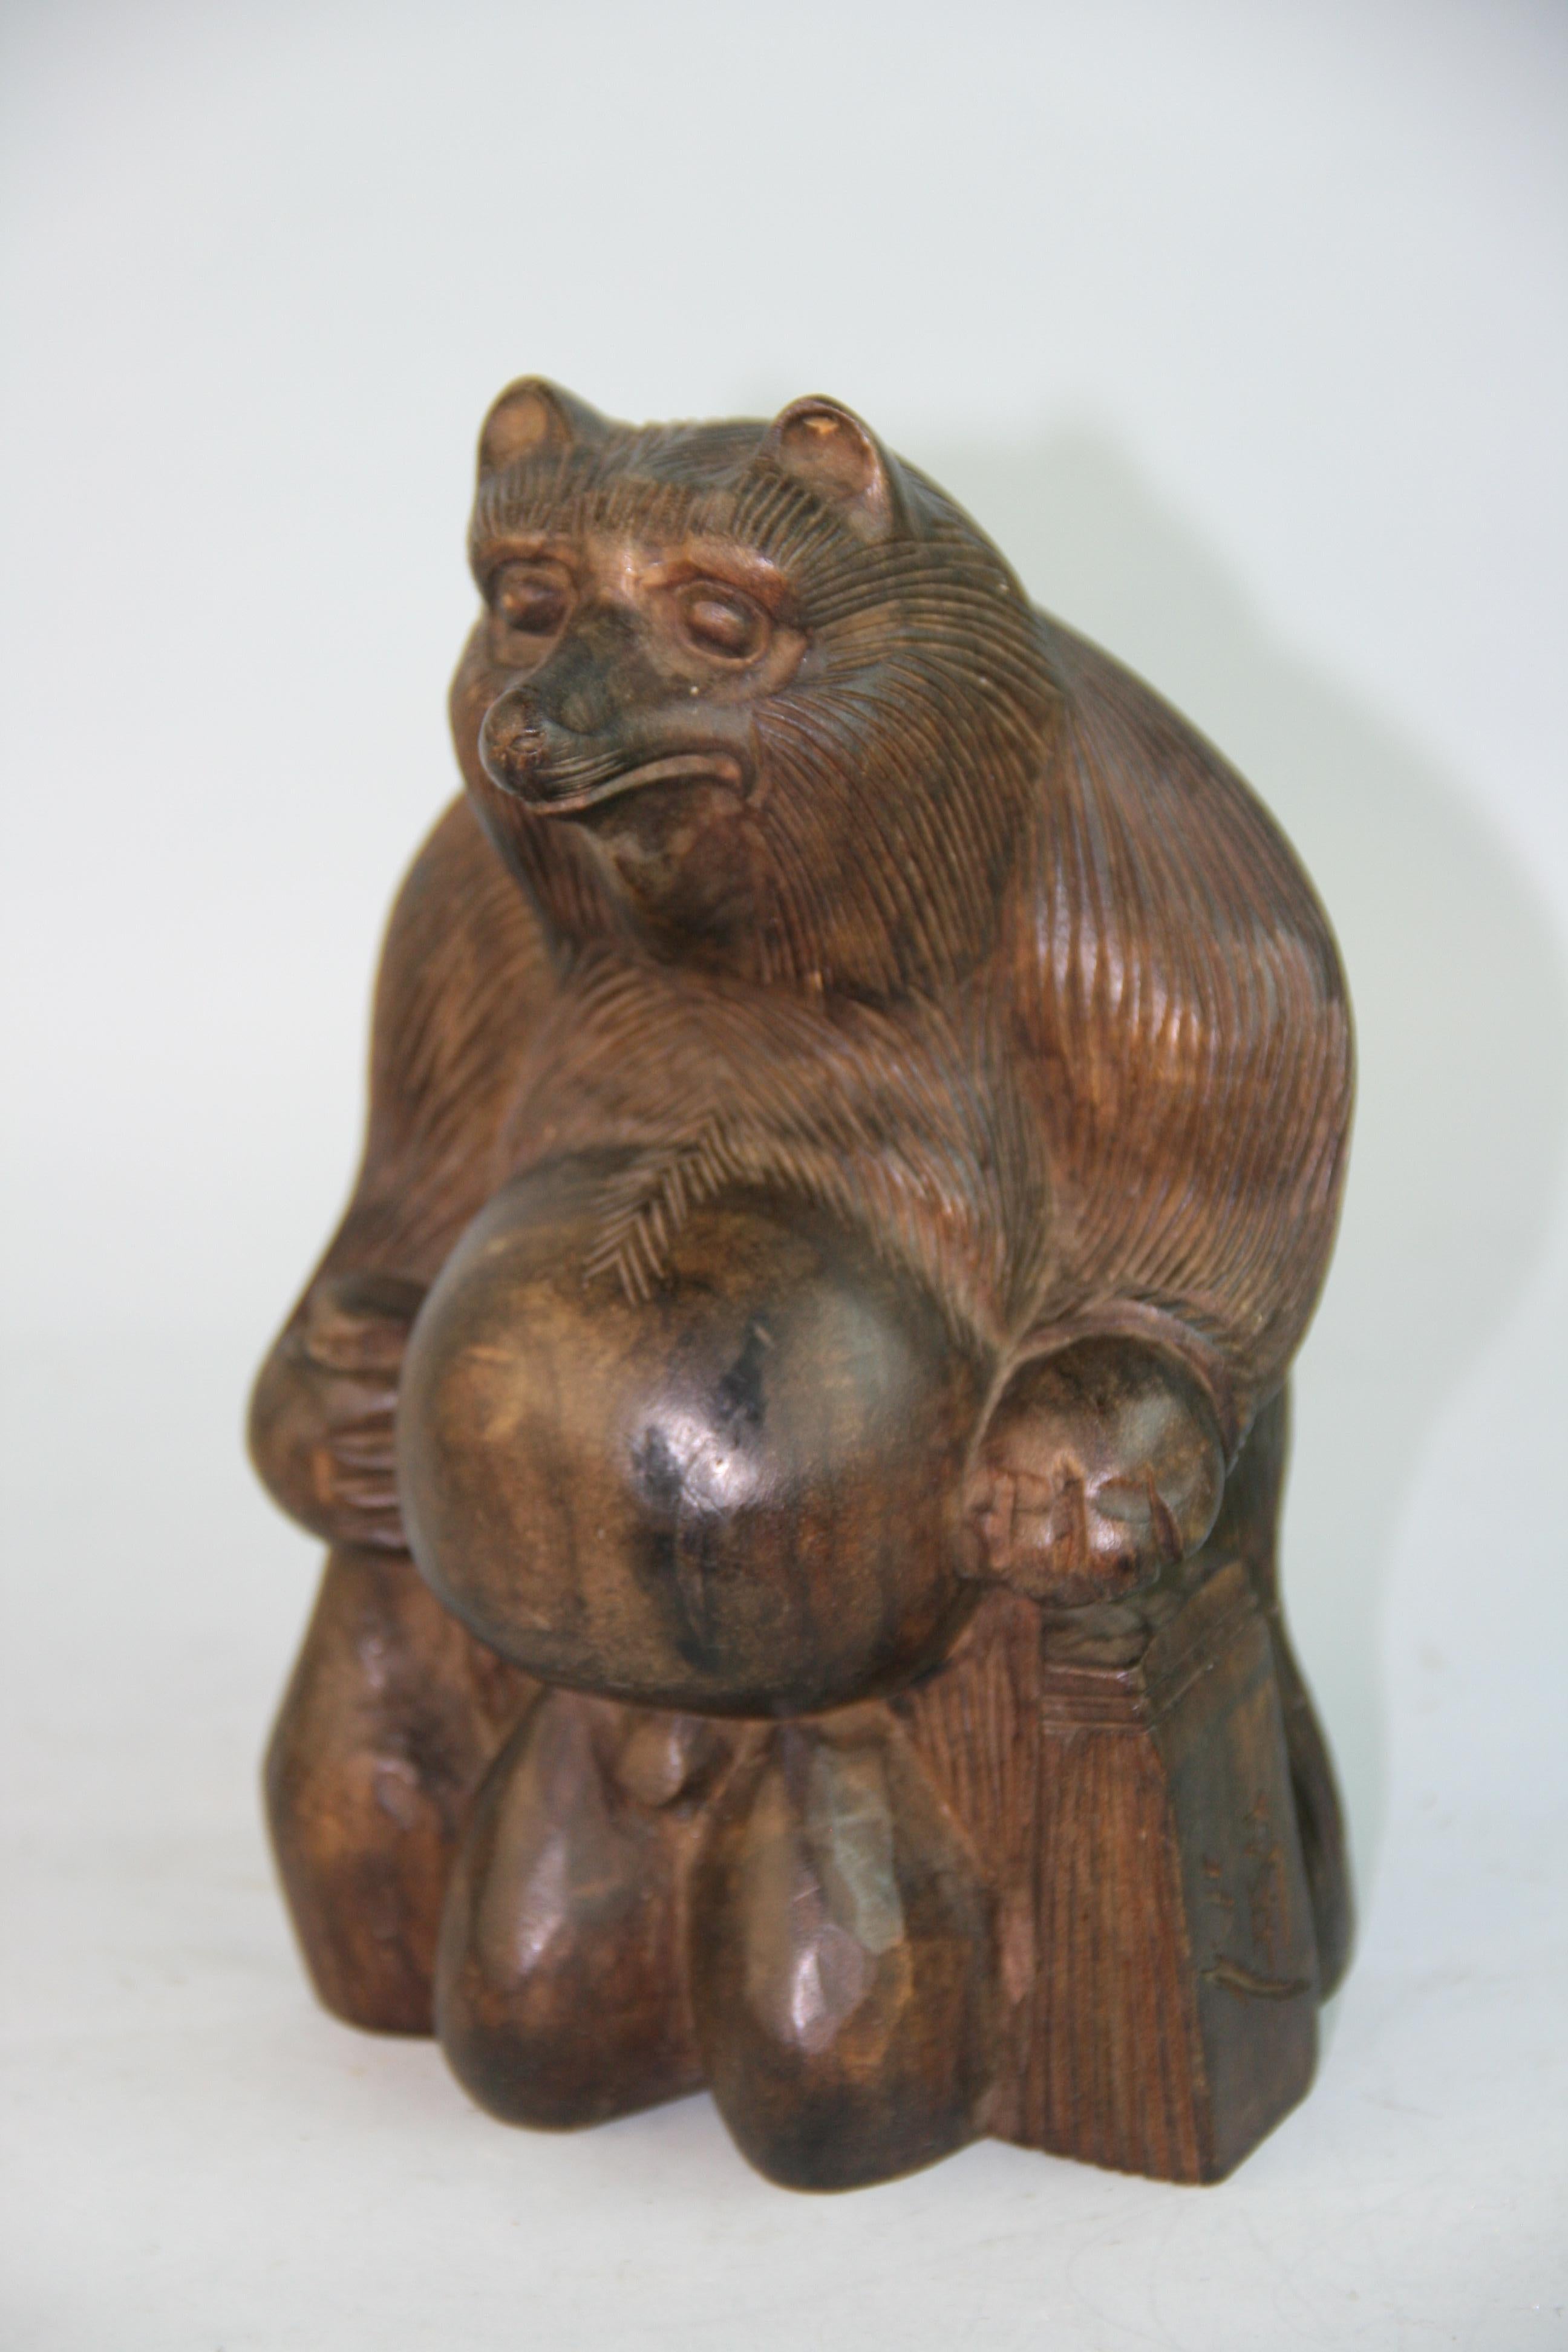 1195 Japan, this rare hand carved one of a kind big belly hardwood bear(actually a Folk Art hero raccoon dog Tanuki) awaits placement in your special place.
He holds a sake bottle in one hand and a sheaf of paper in the other.
Notable are his